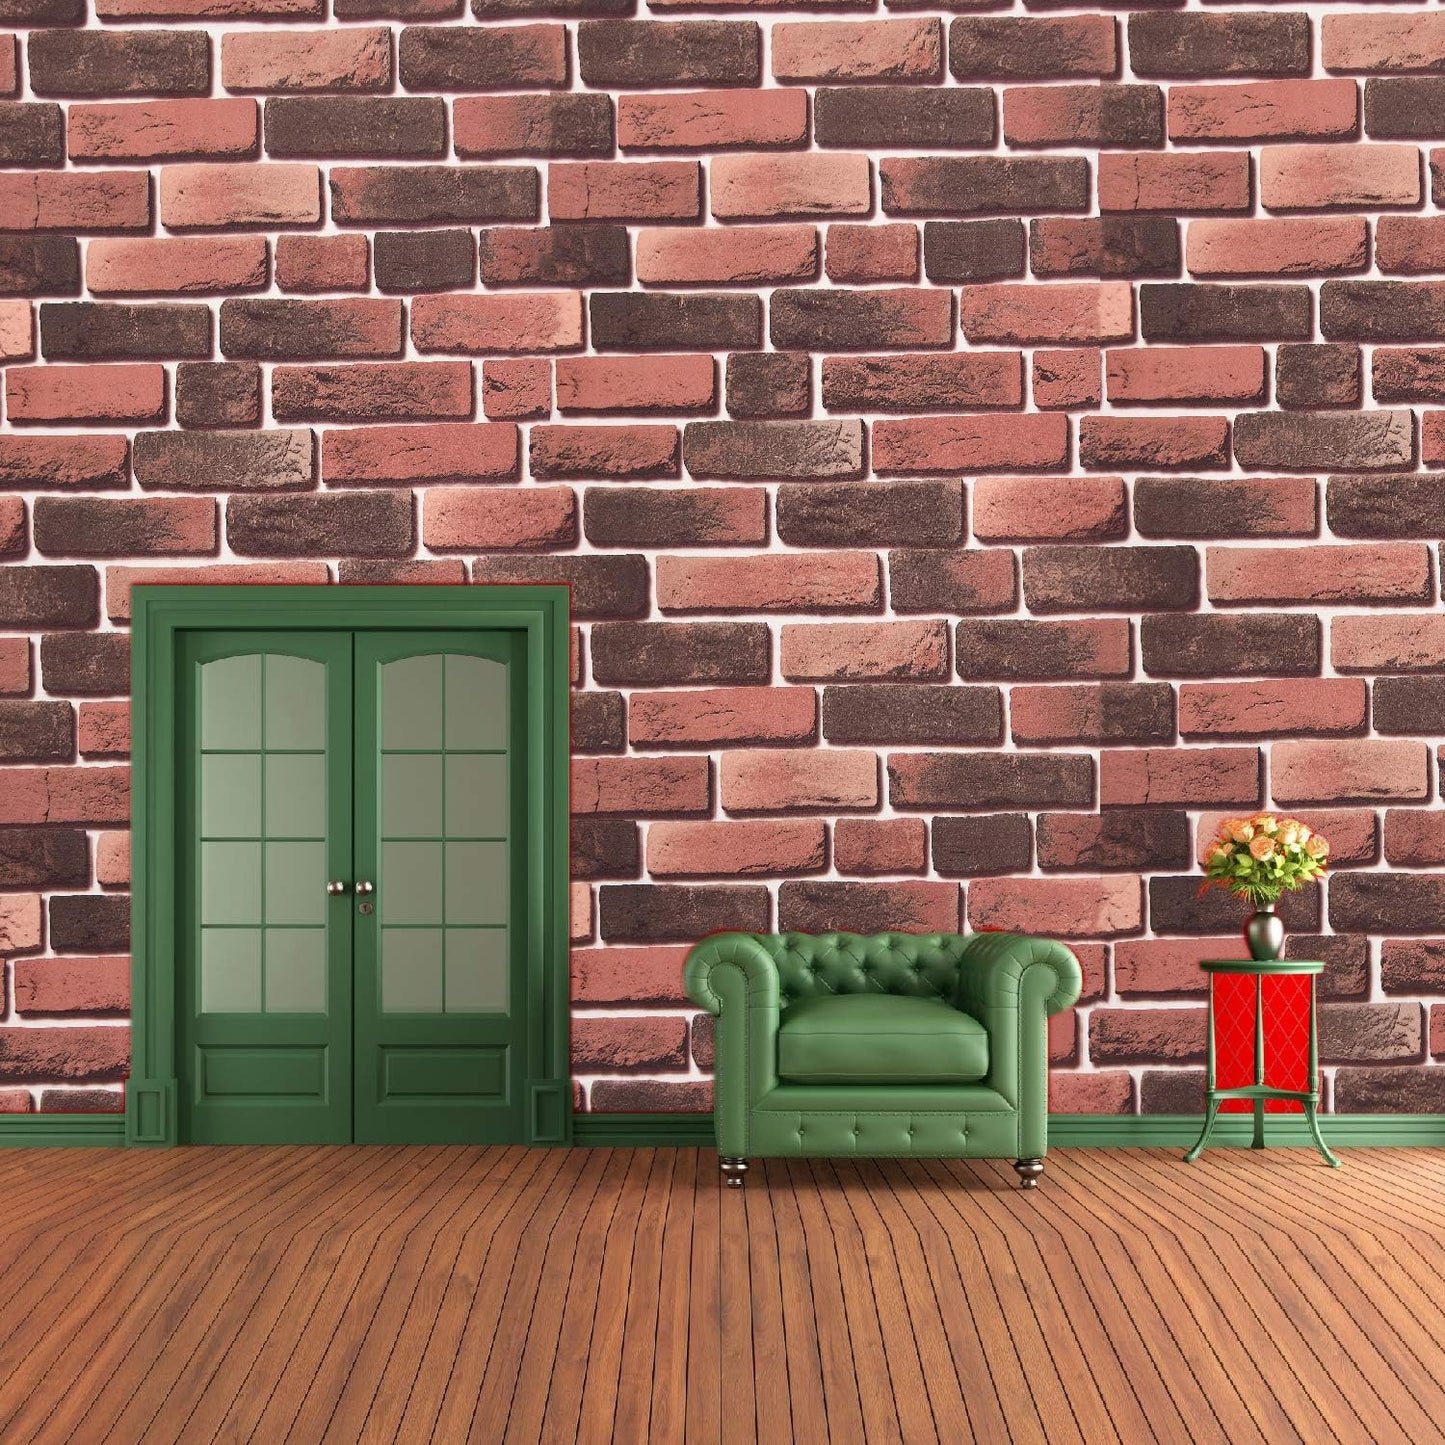 3D Latest Brick Design Brown & Red Wallpaper Roll for Home Walls 57 Sq Ft (0.53m or 21 Inches x 10m or 33 Feet)